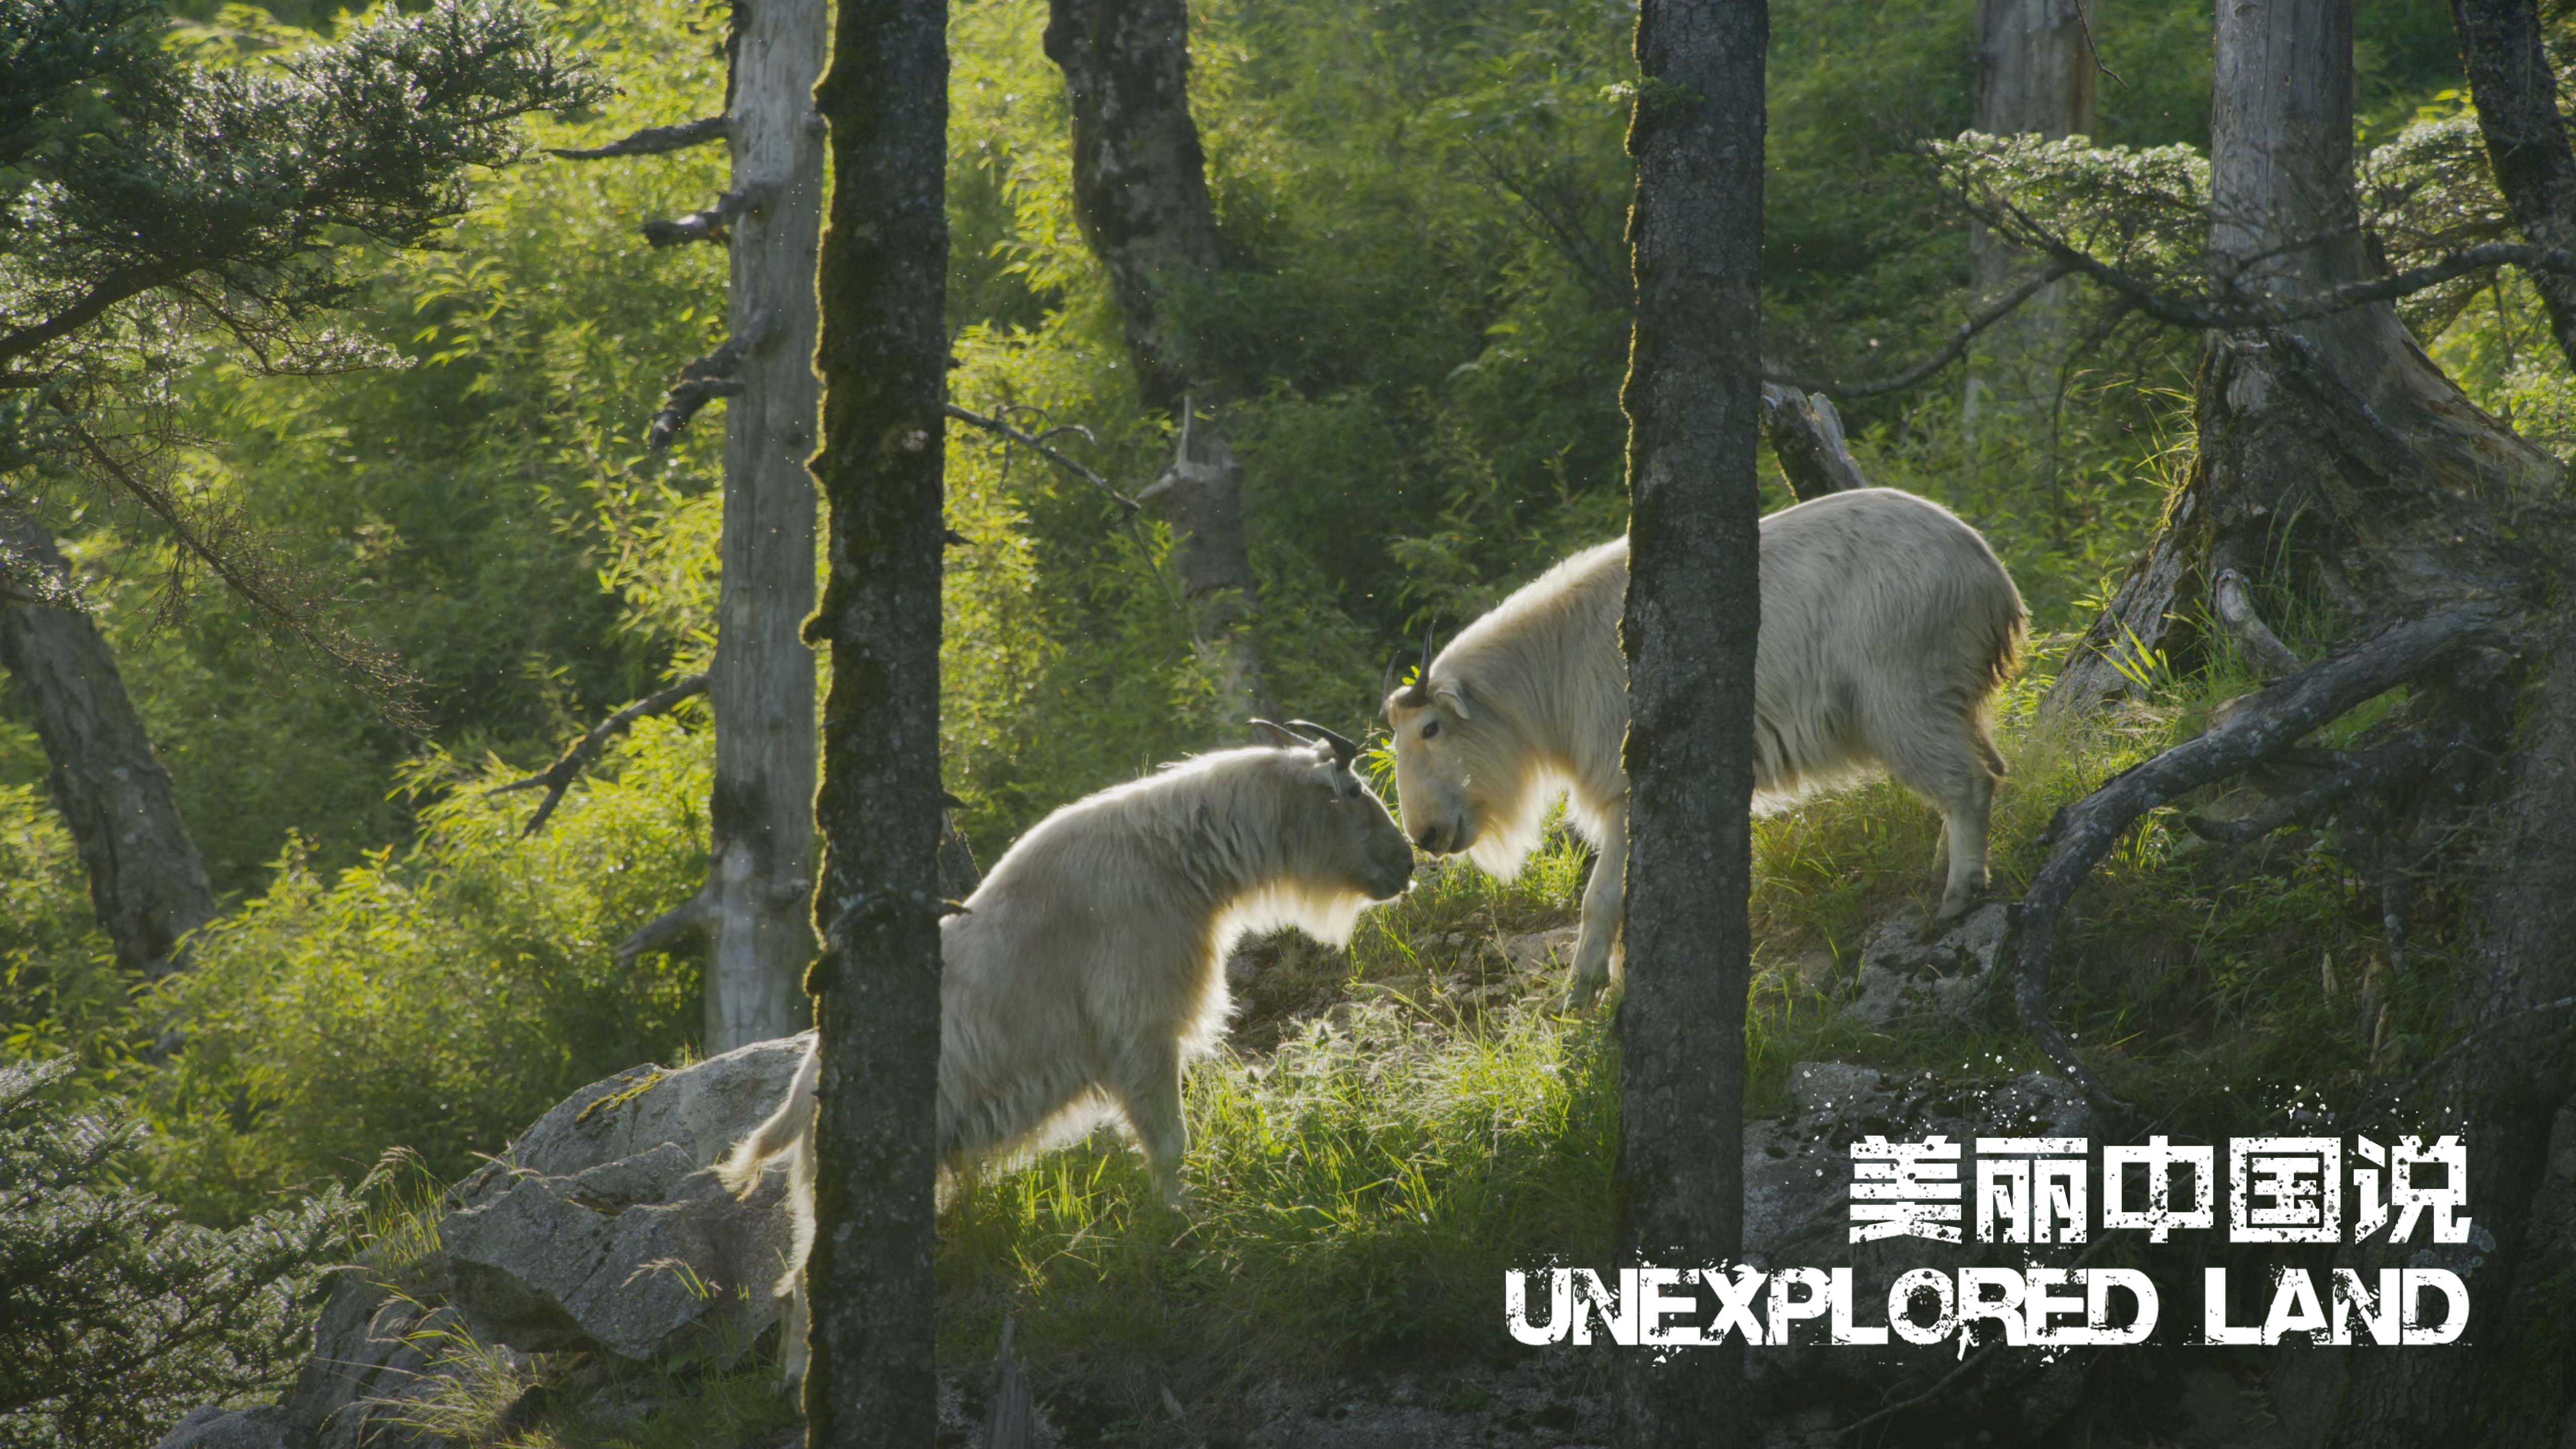 Unexplored Land: Their growing stories in Qinling Mountains